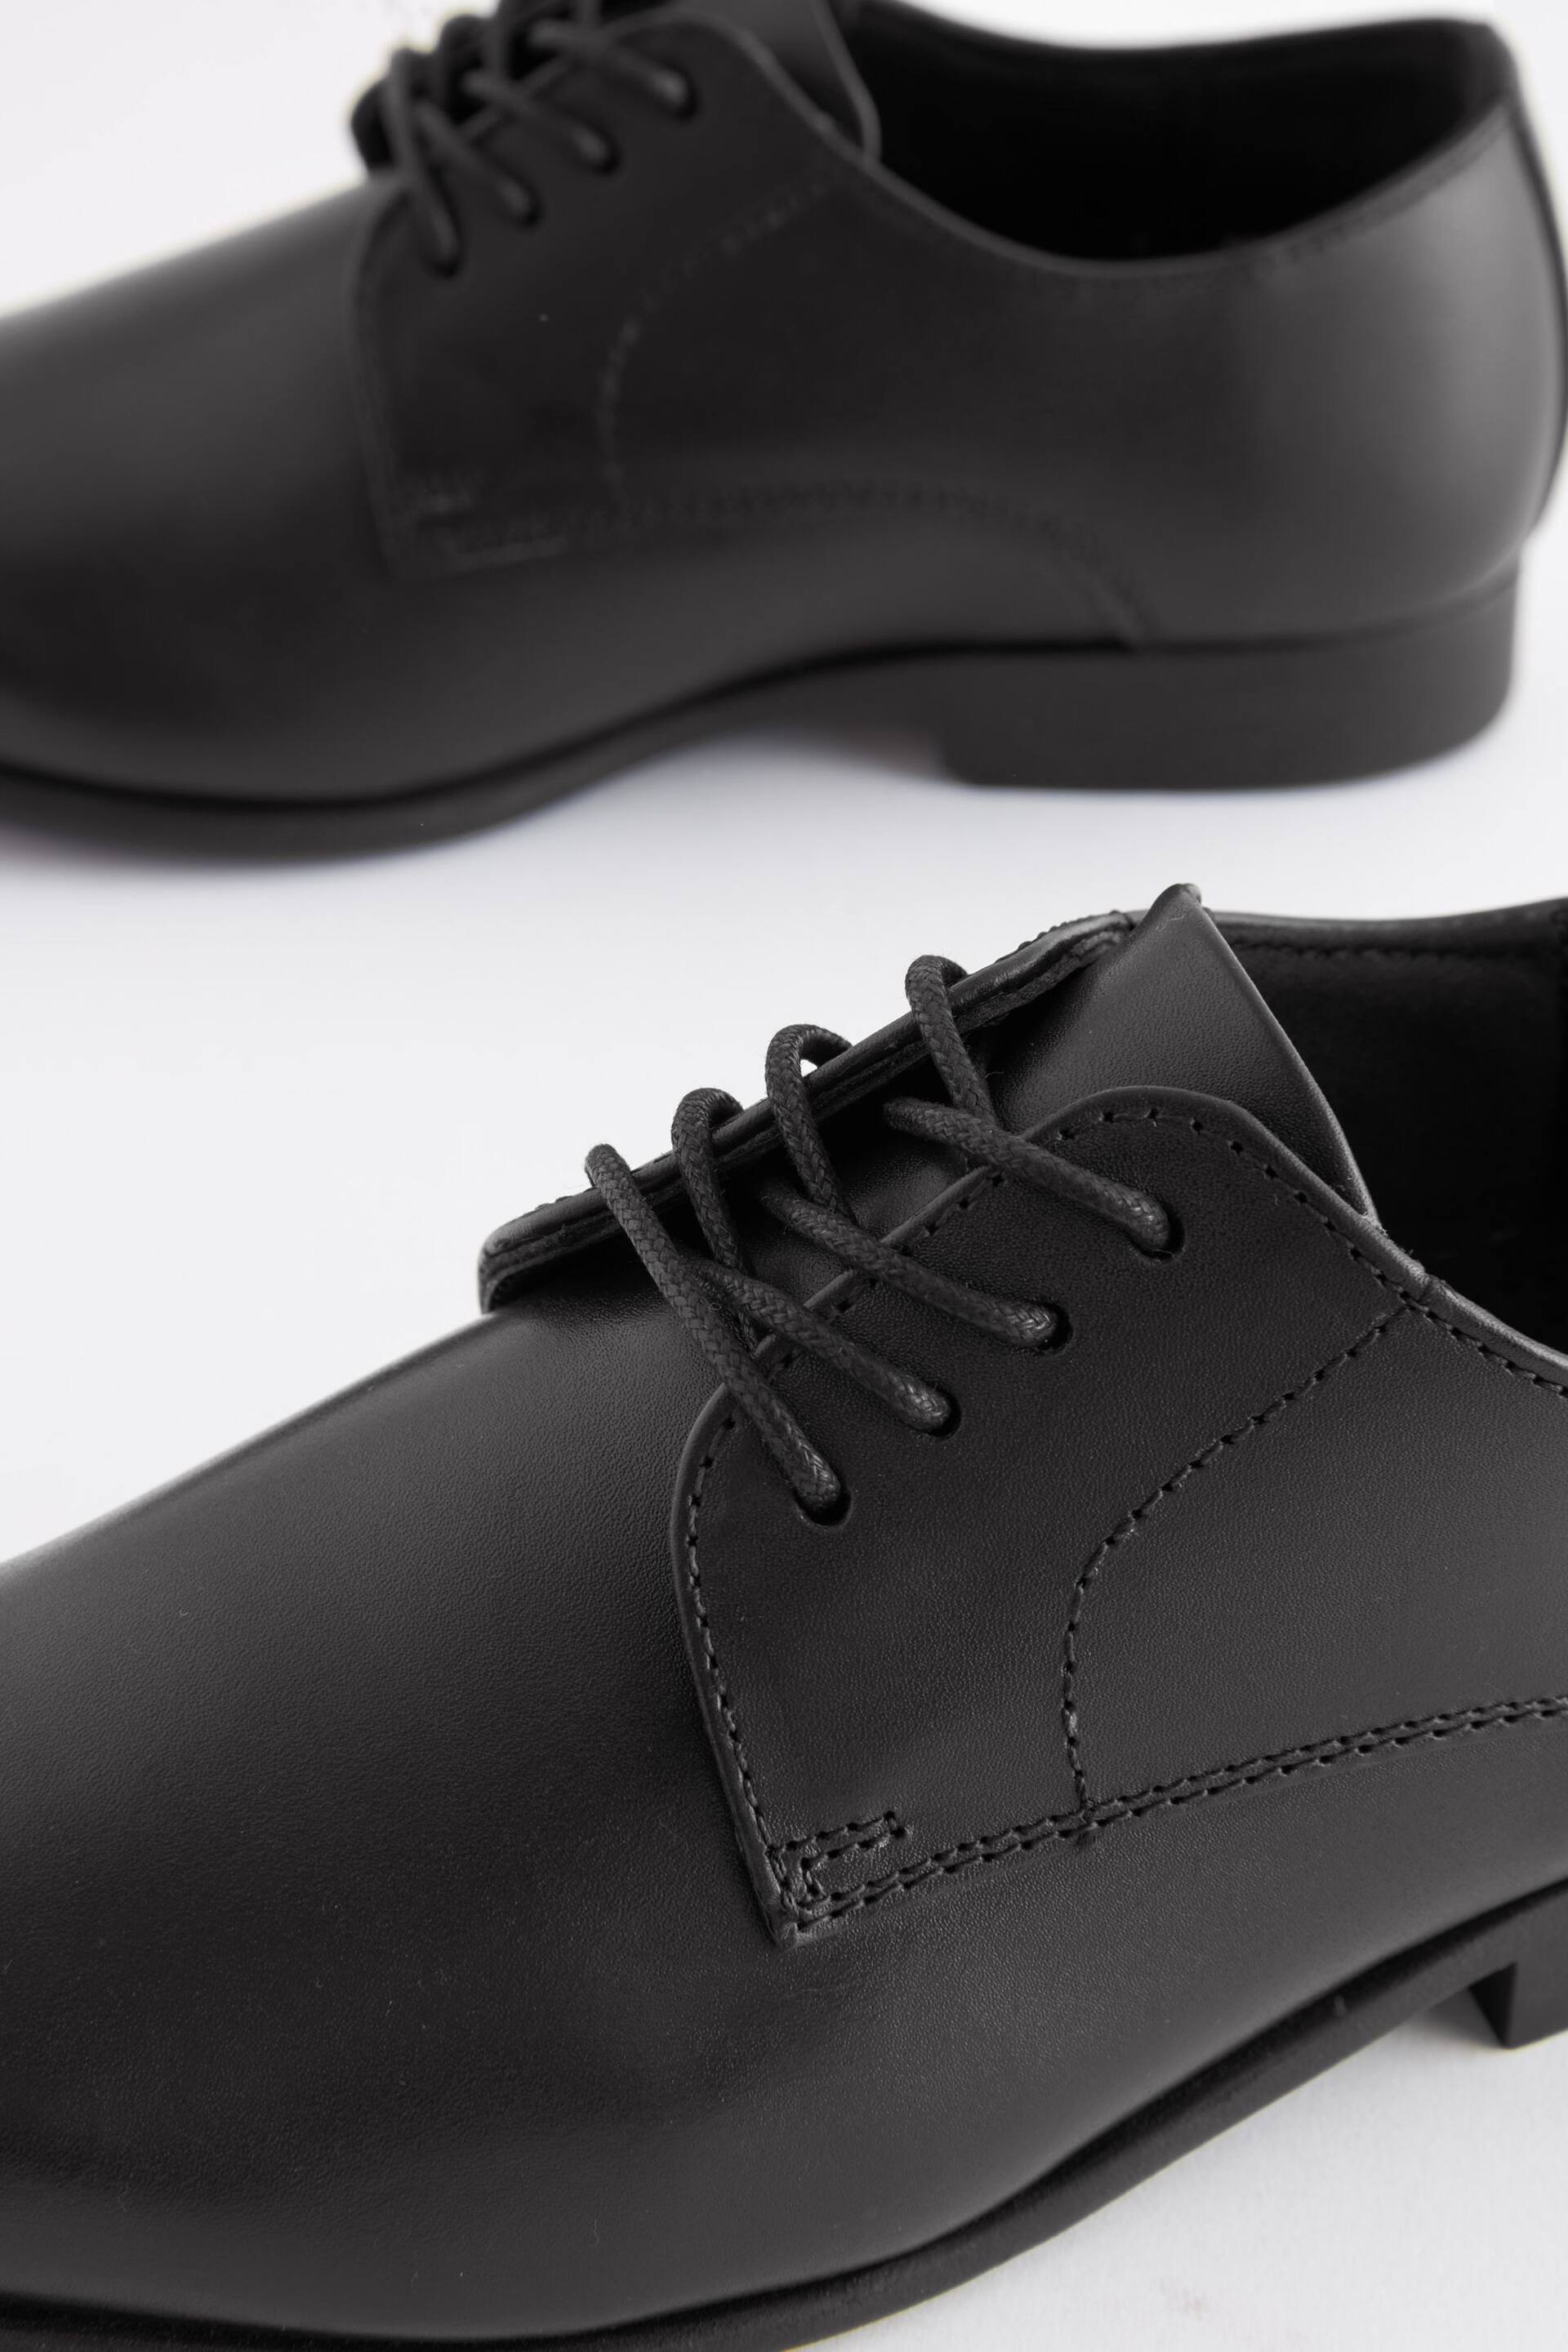 Black Wide Fit (G) School Leather Lace Up Shoes - Image 8 of 9